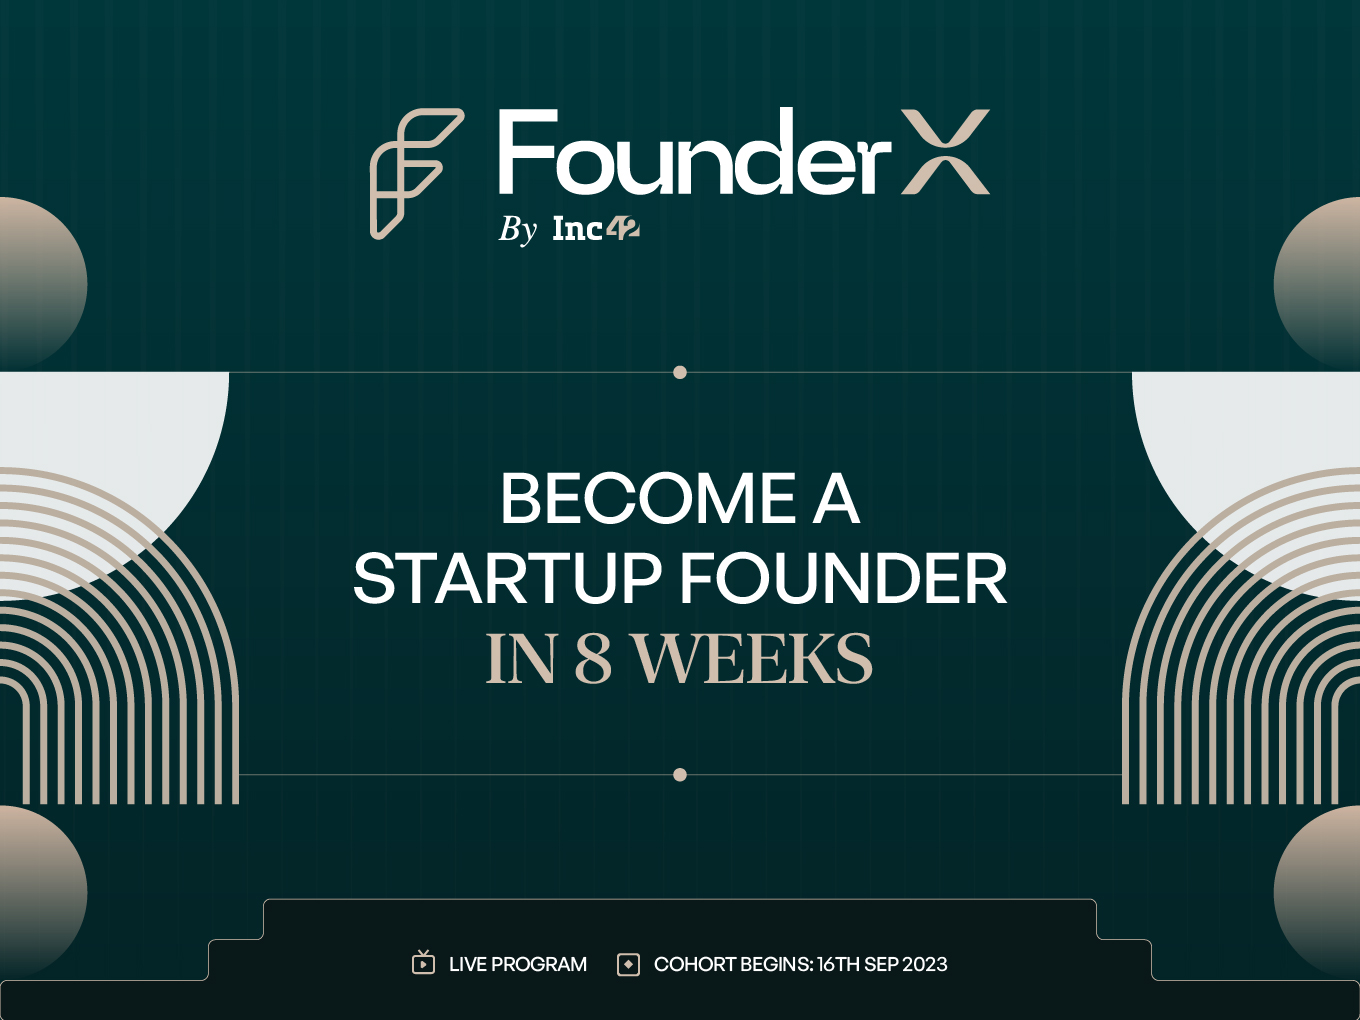 Announcing FounderX: Learn How To Build A Billion-Dollar Startup From India’s Top 1% Founders